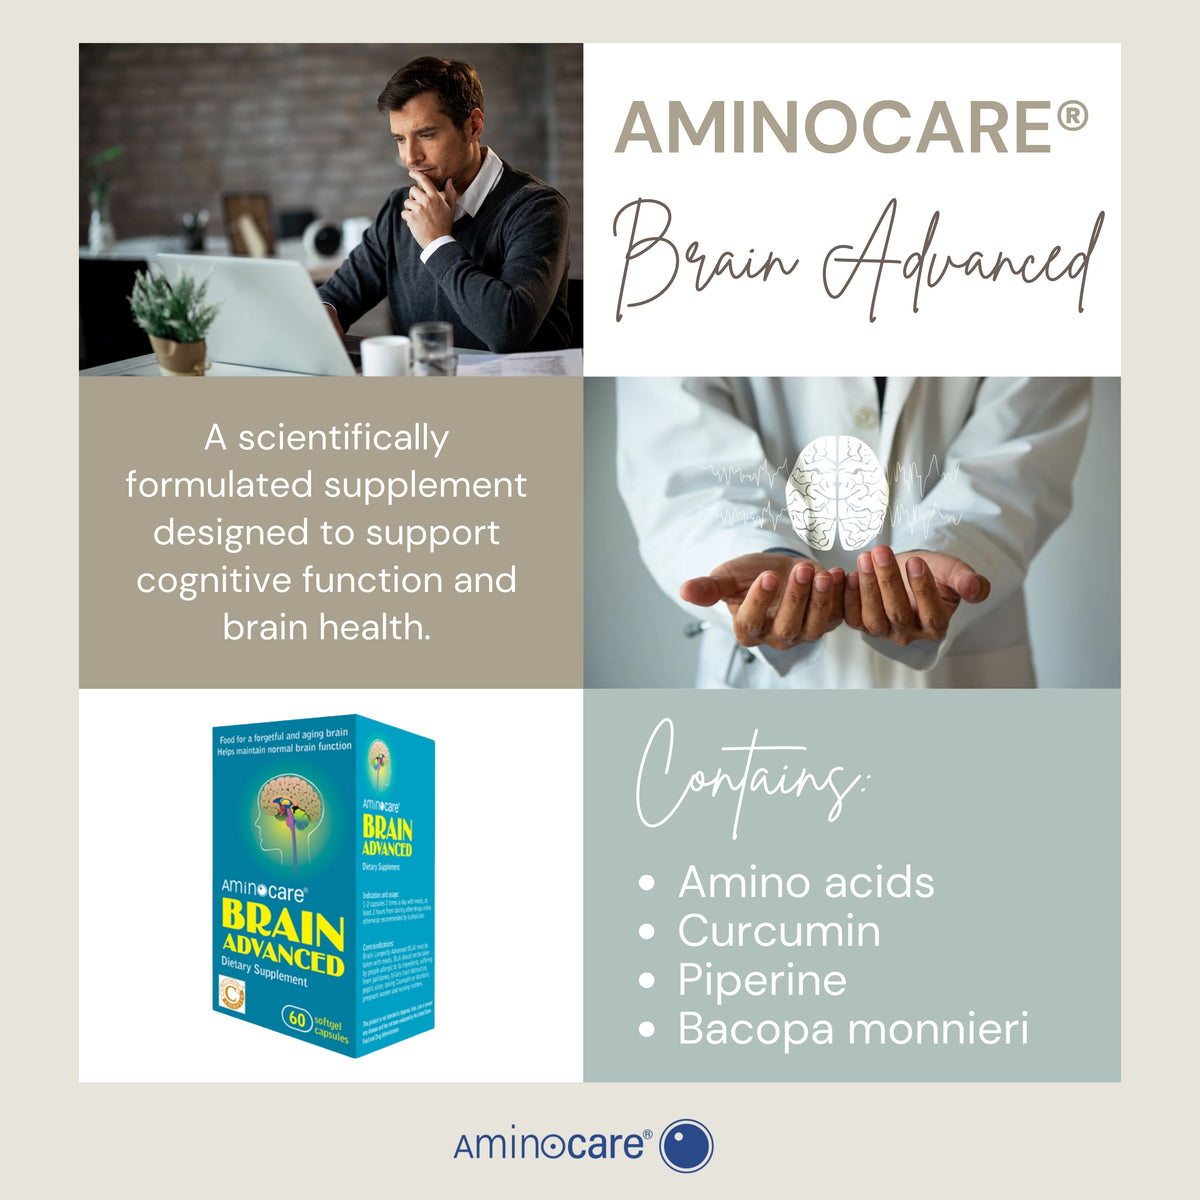 Support Cognitive Function and Brain Health with Aminocare®